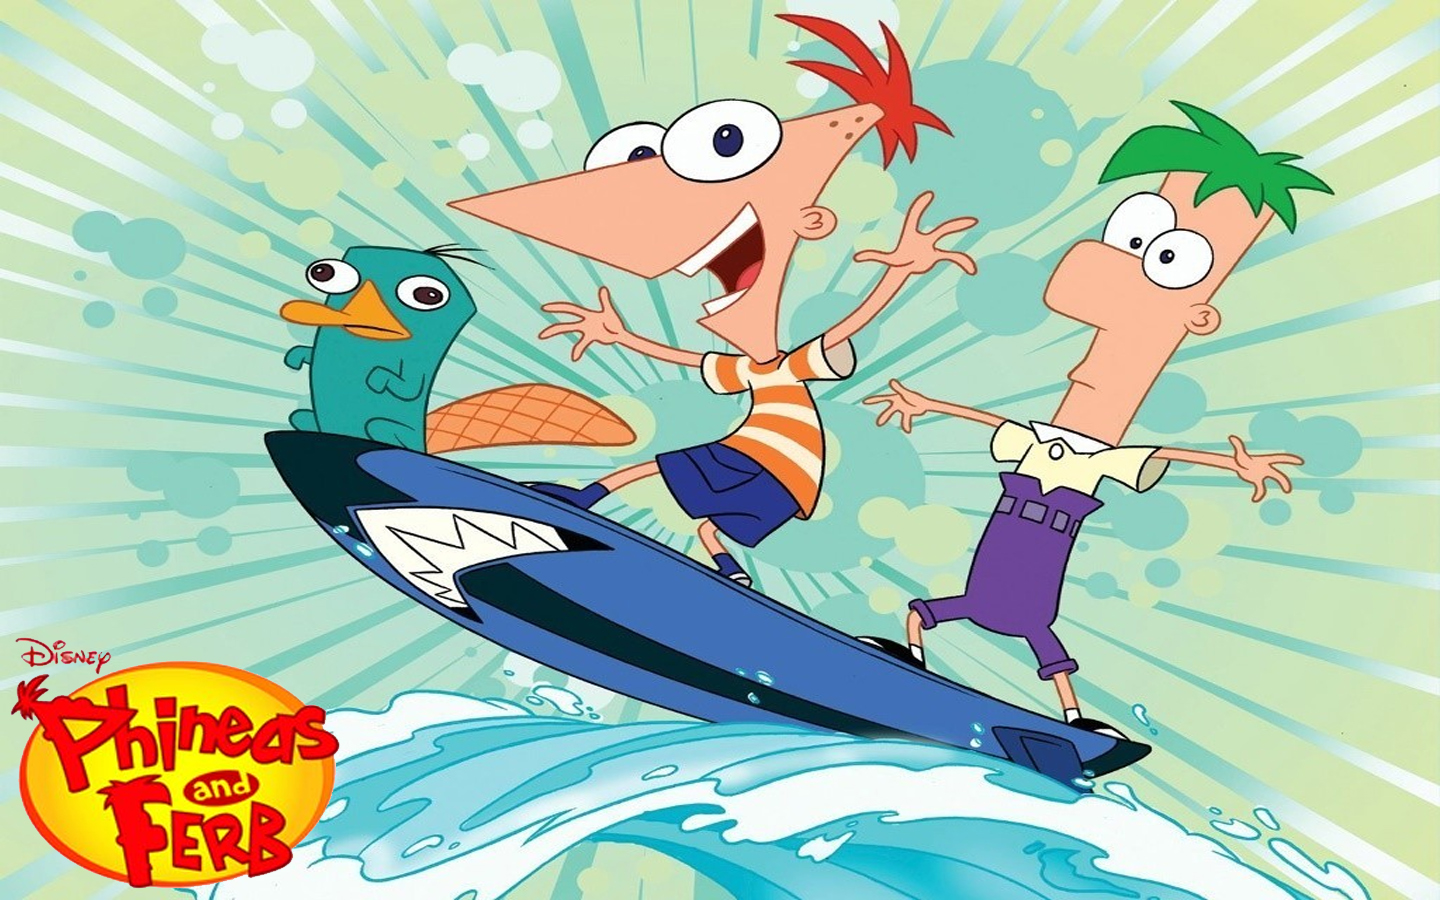 Image - Phineas and Ferb Wallpaper 1.jpg - Phineas and Ferb Wiki ...